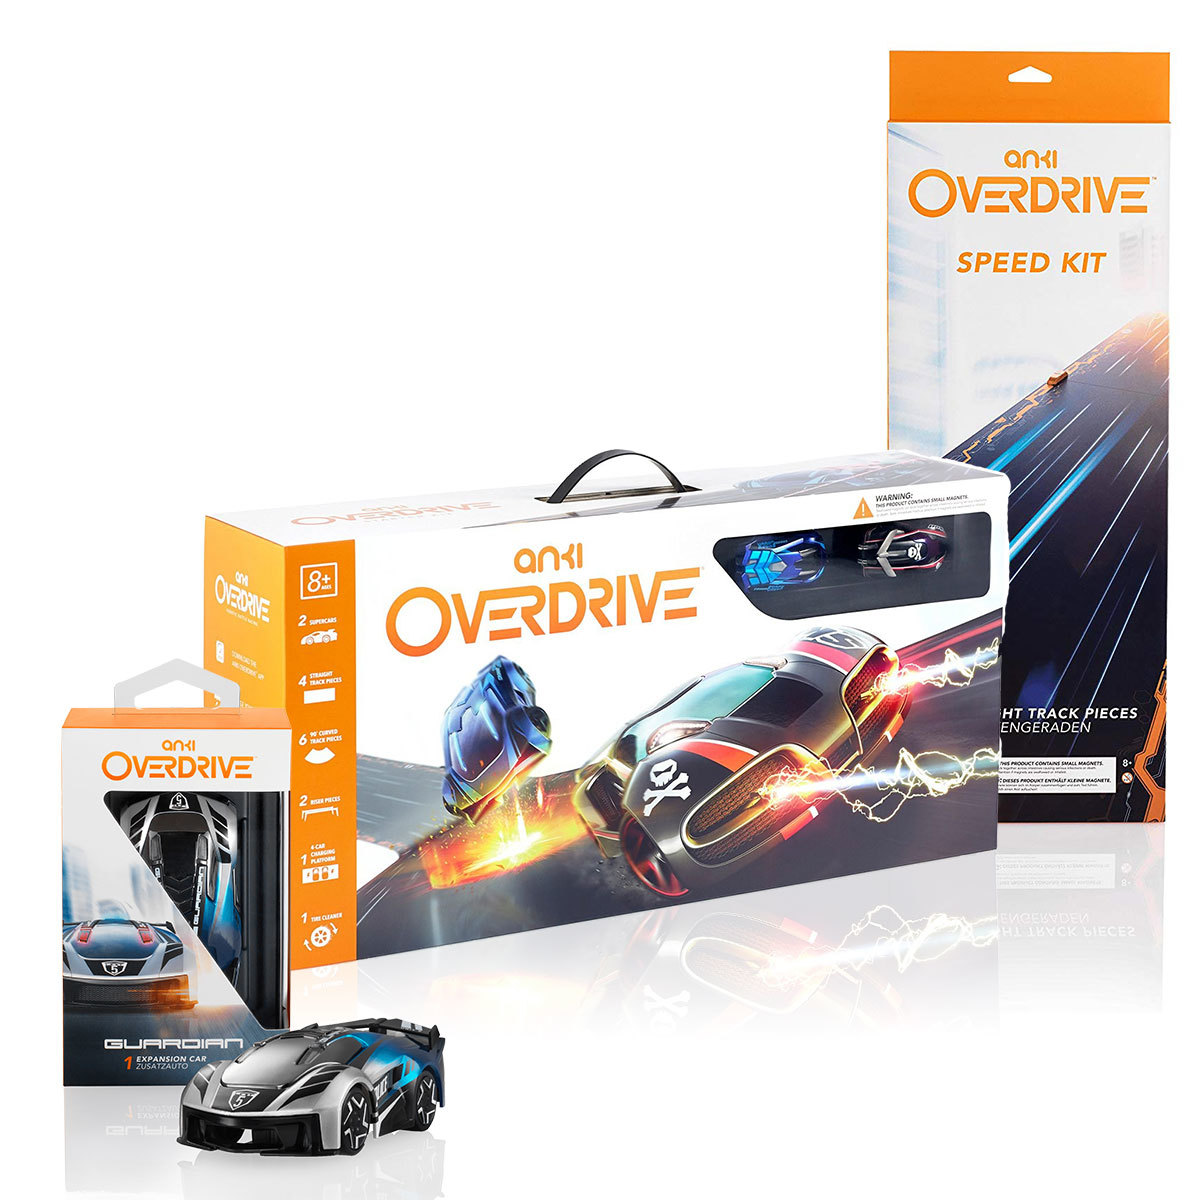 anki overdrive expansion